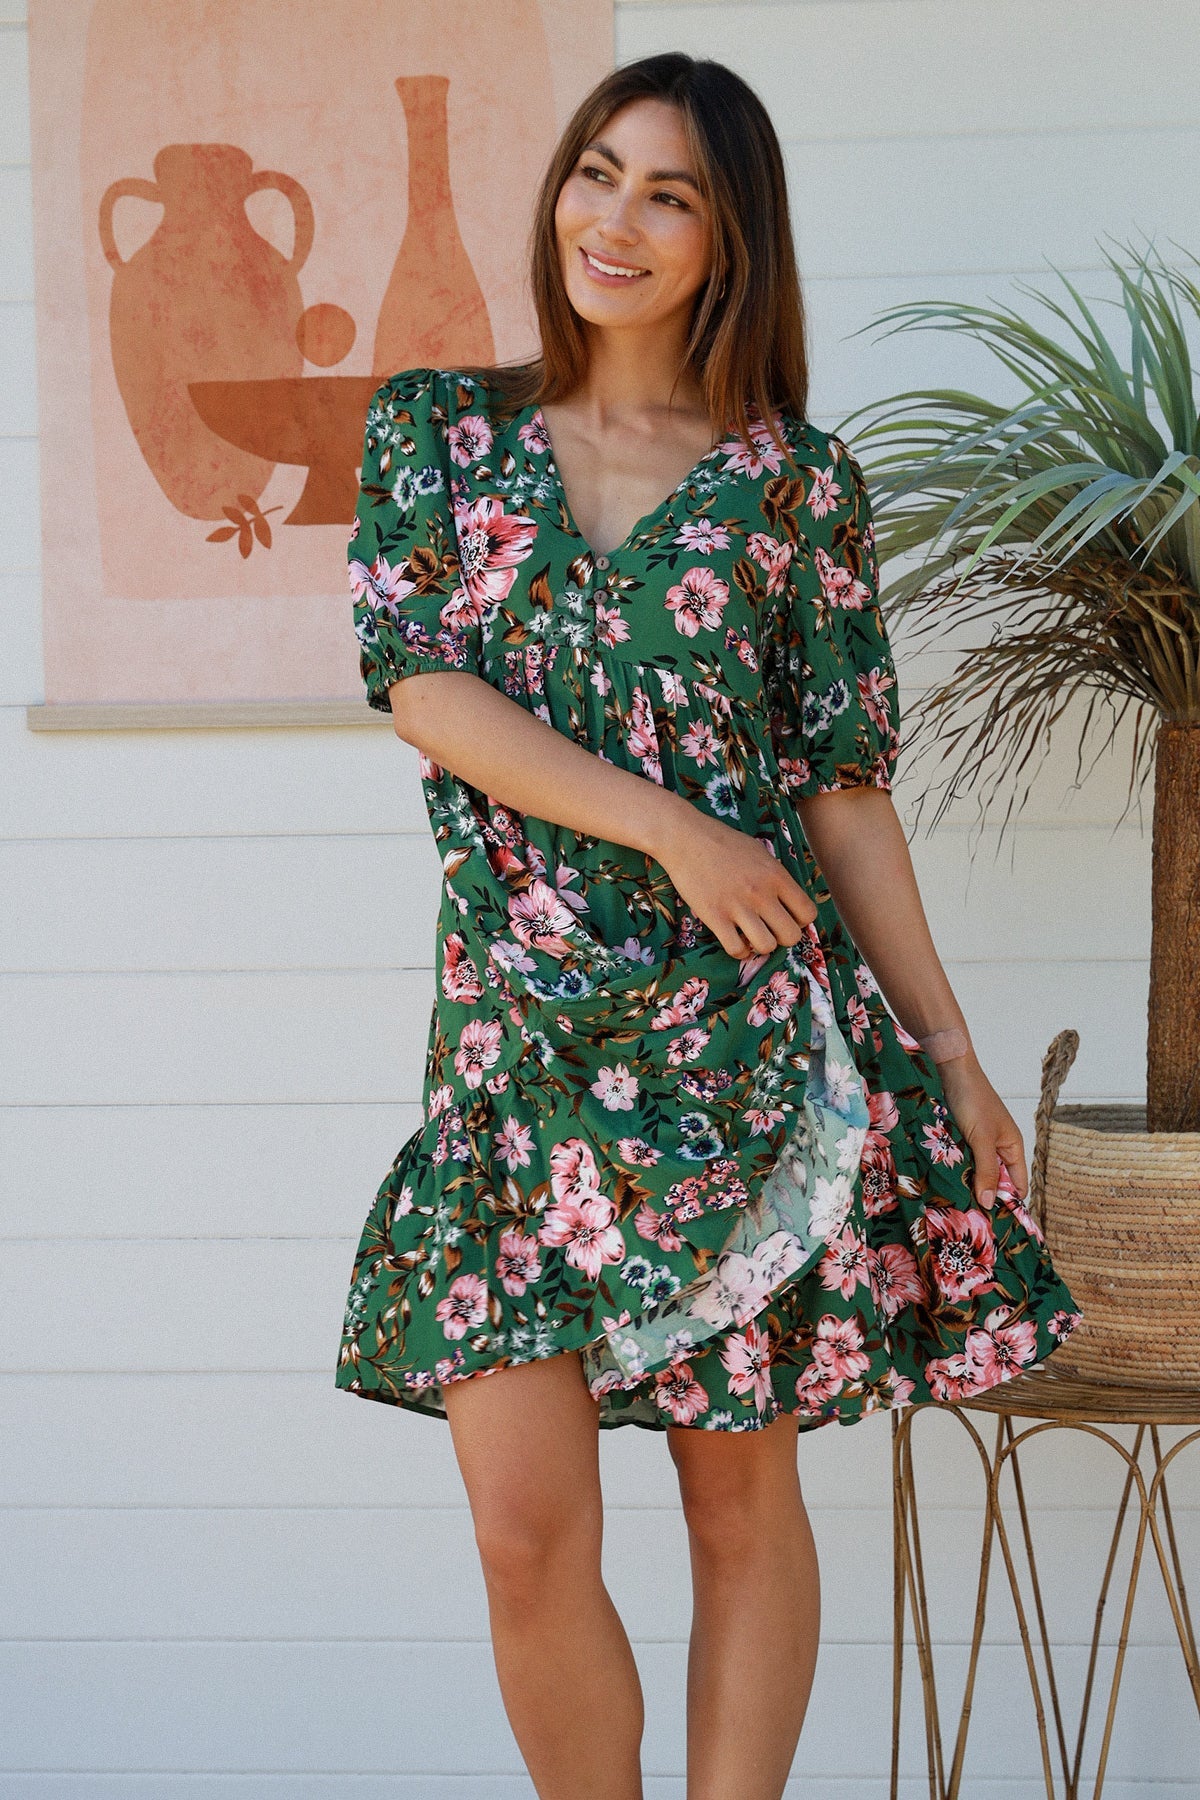 The Daisy Mini Dress is here to bring a bit of sunshine and a lot of chic style to your wardrobe! Featuring a V-neckline, elasticated sleeves, button detail, and a tiered style, this dress is ready to bring some flower power to your summer look!